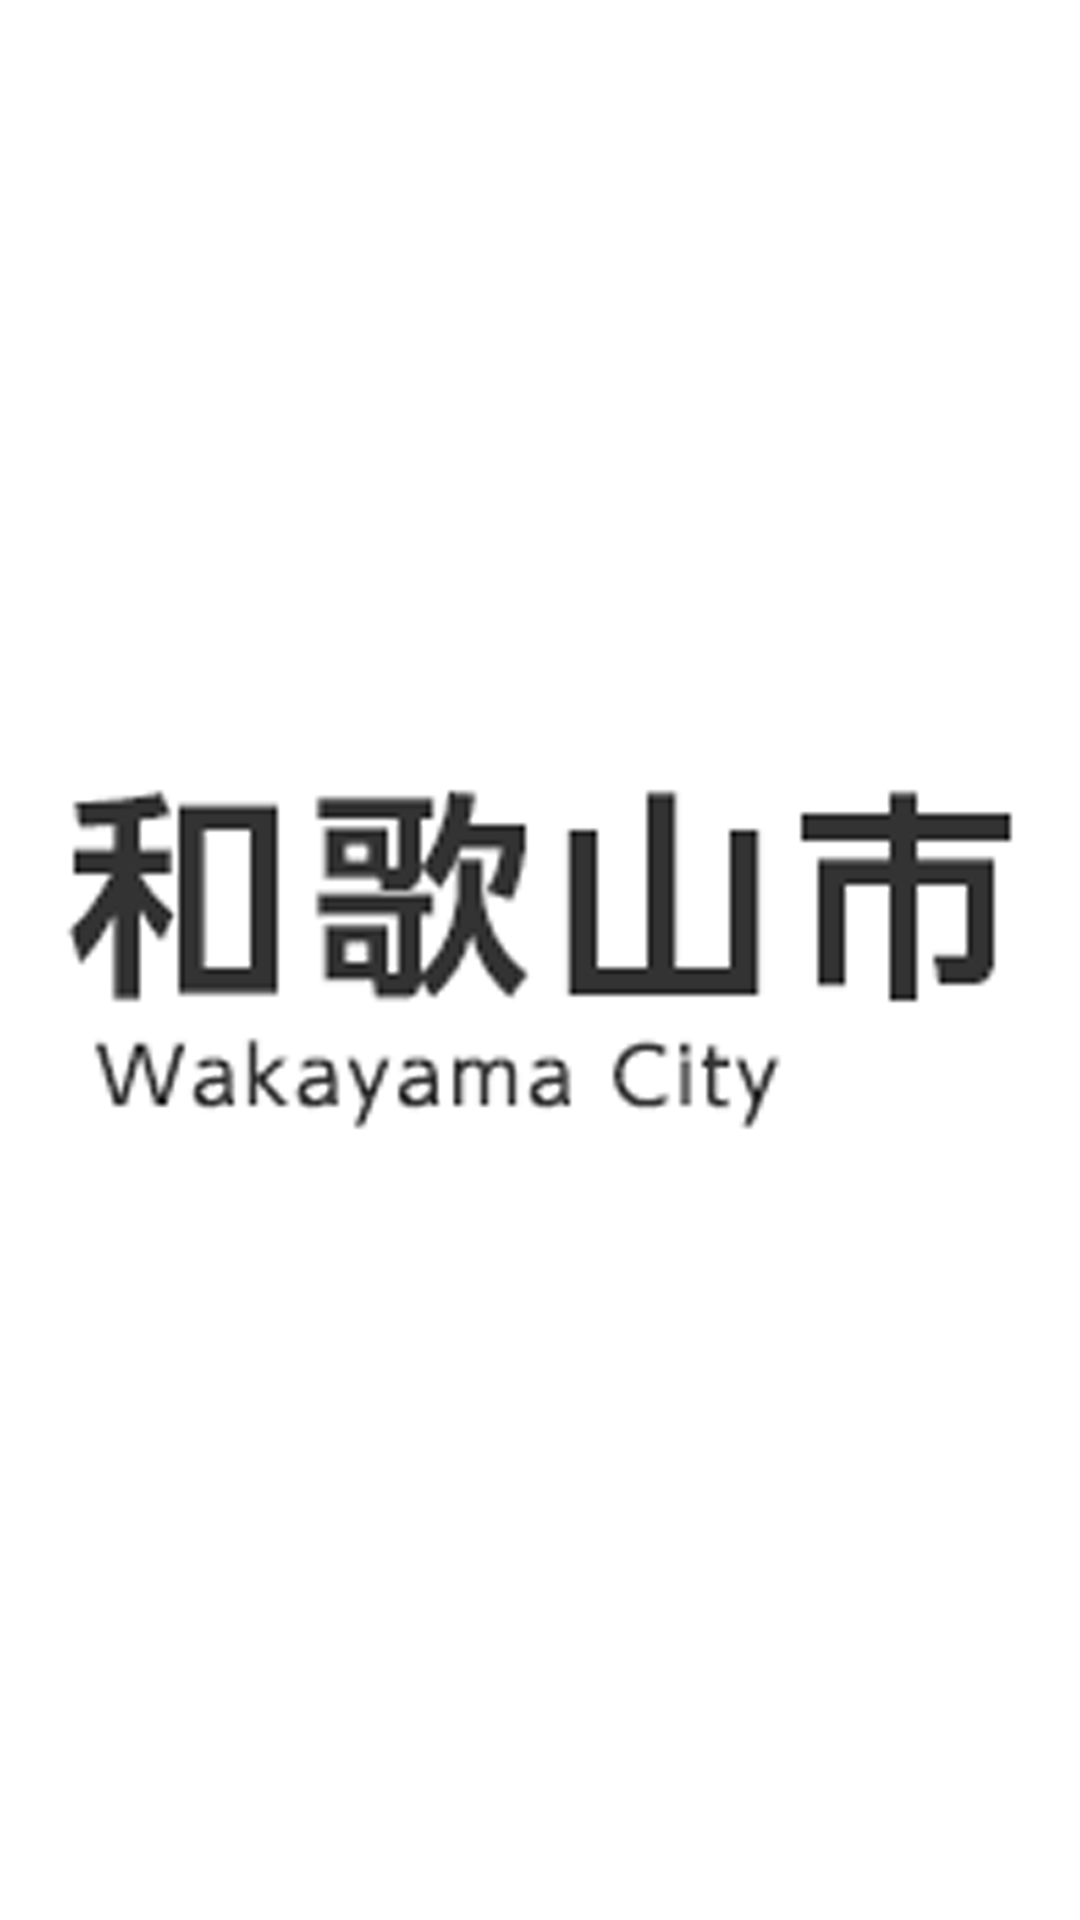 <br />
<b>Warning</b>:  Trying to access array offset on value of type null in <b>/home/r0530757/public_html/dev.wakayamacity.life/wp-content/themes/wakayama/archive.php</b> on line <b>40</b><br />
